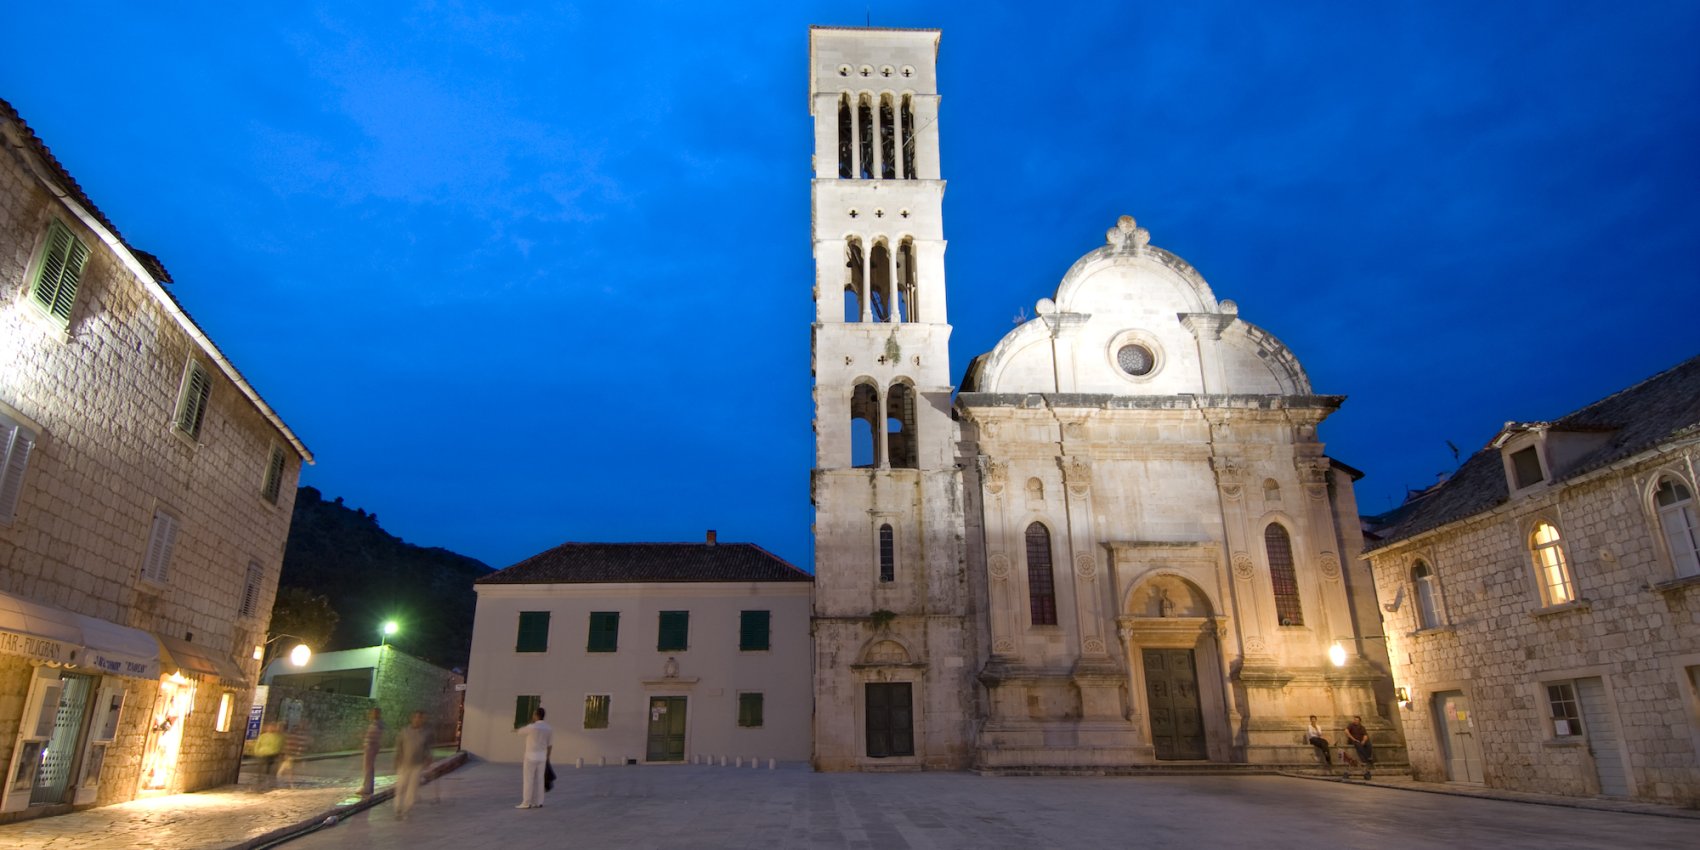 Ancient architecture square in Croatia at dusk